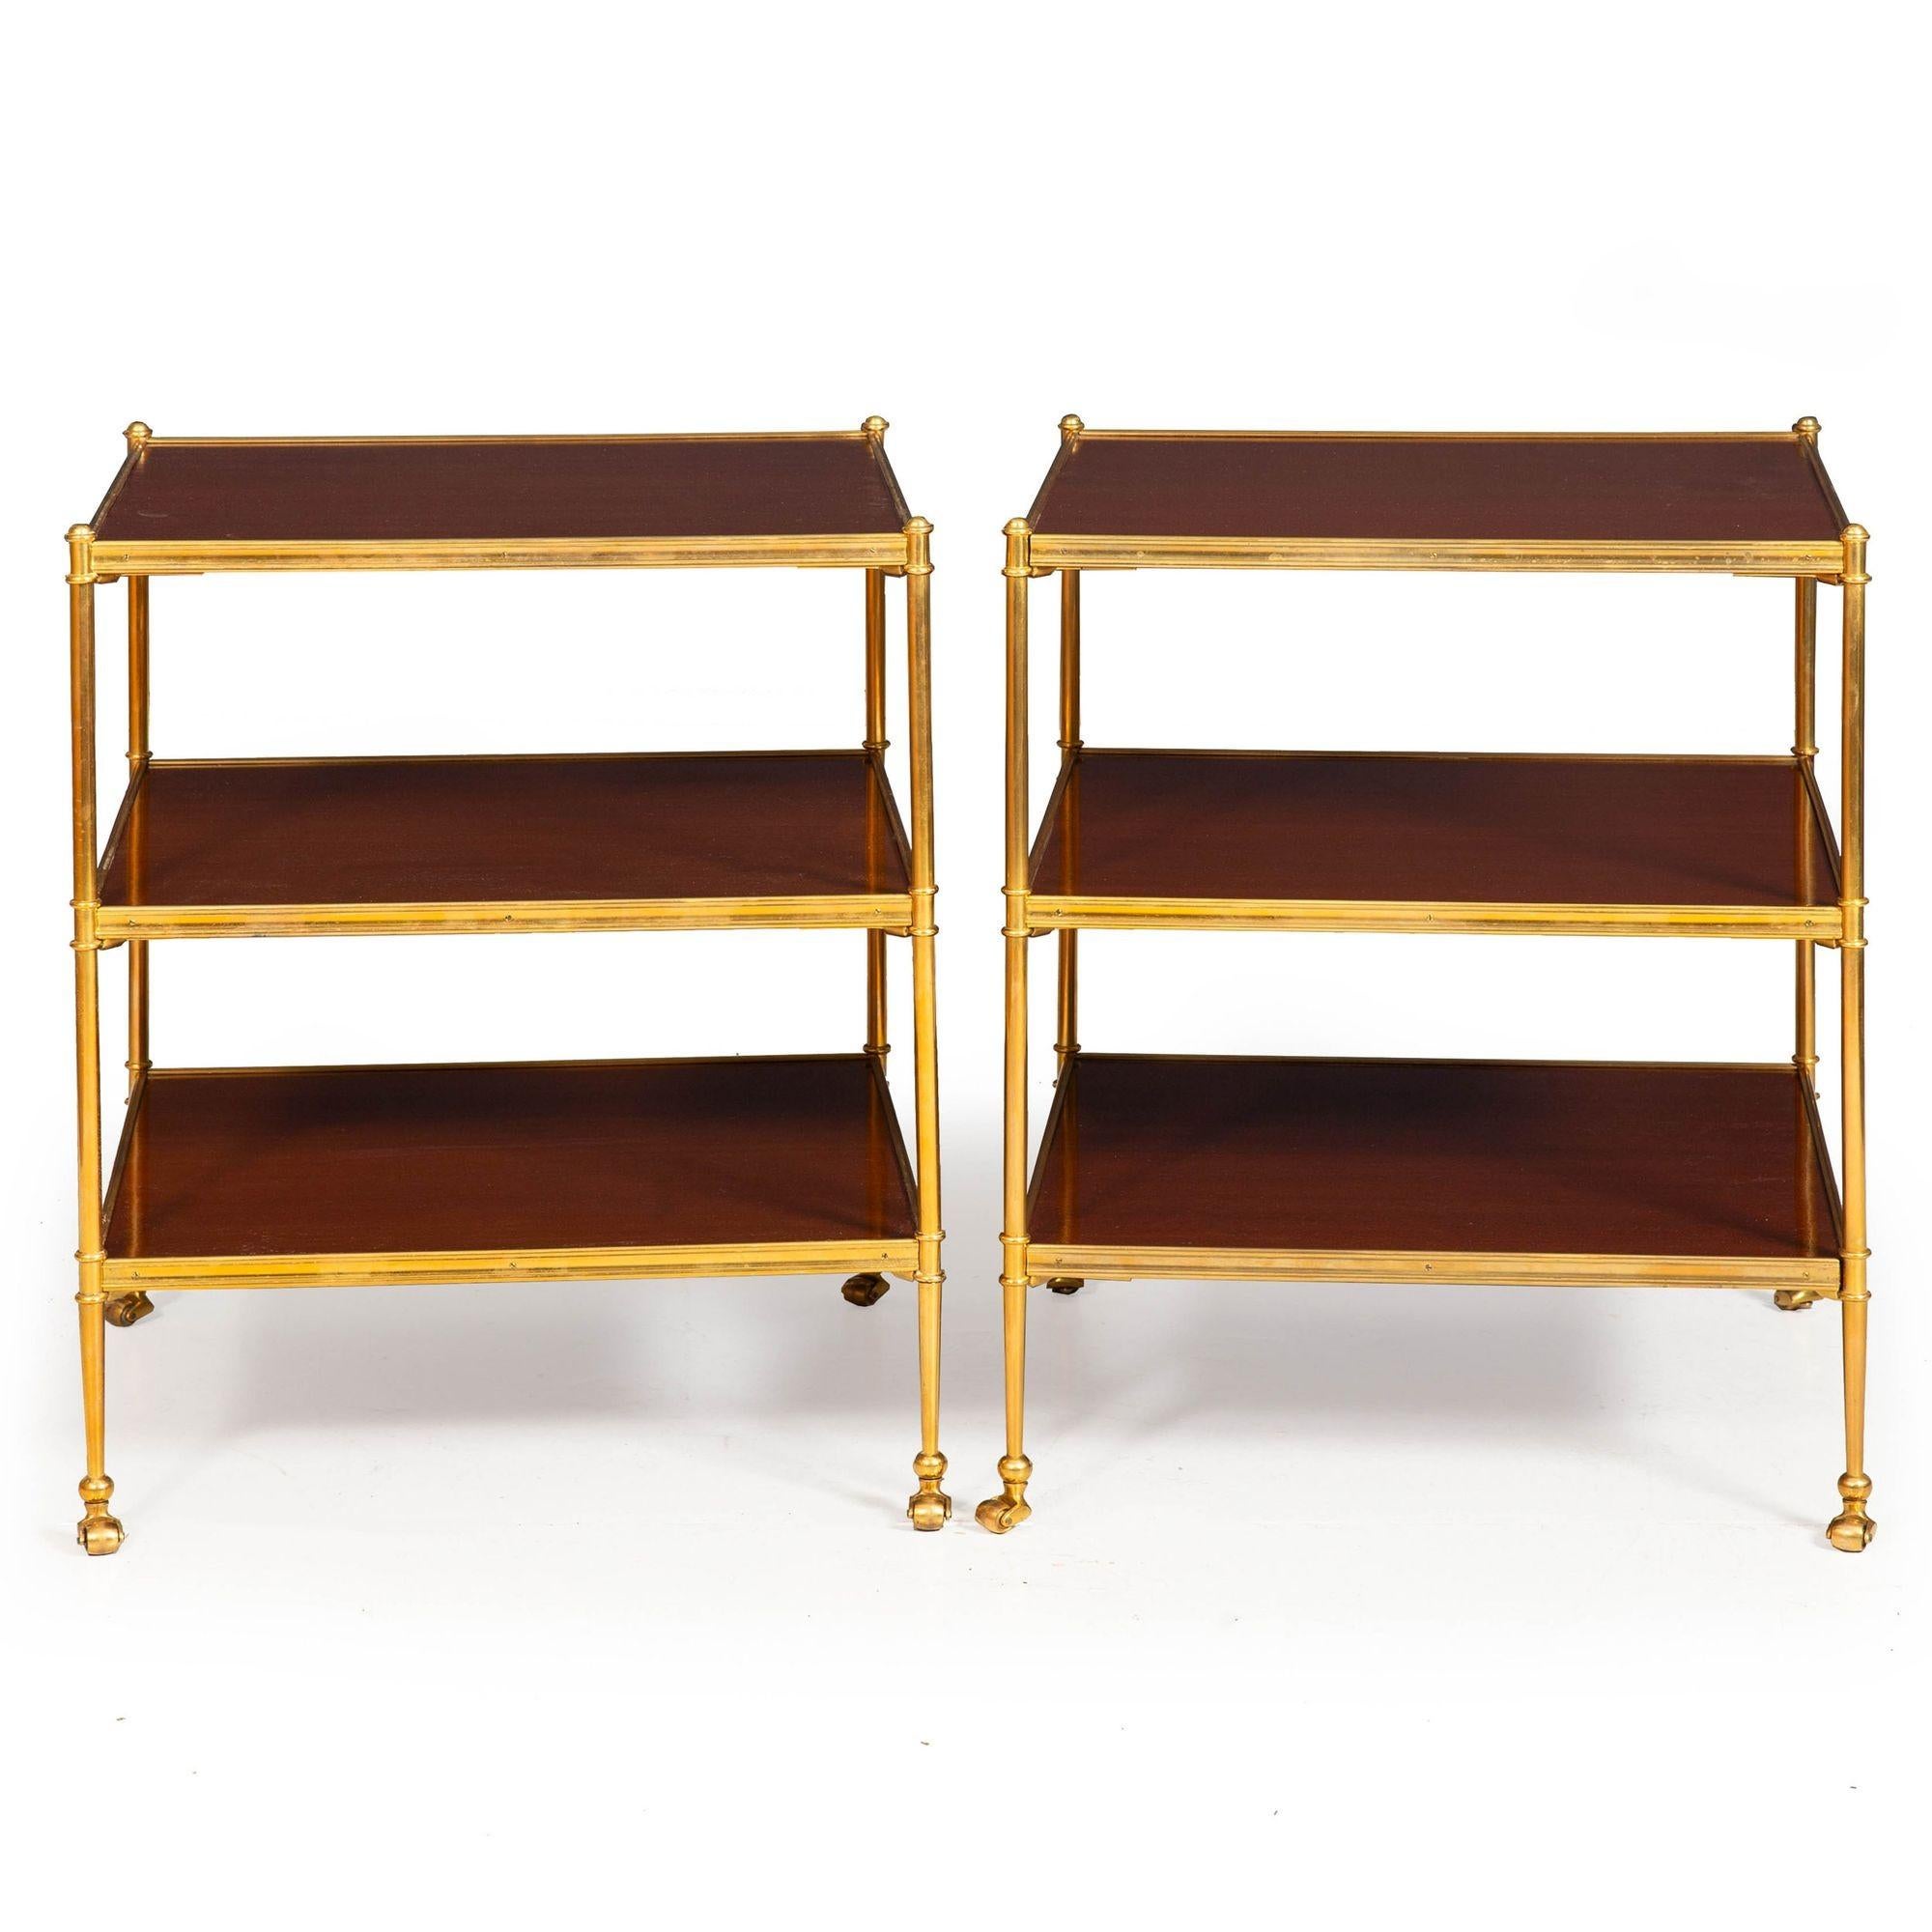 A VERY FINE PAIR OF REGENCY STYLE GILT-BRONZE AND MAHOGANY THREE-TIER ETAGERES
In the manner of Maison Jansen  unmarked  ca. mid 20th century
Item # 312XJH07E

An exceedingly fine pair of three-tier end tables from the second half of the 20th